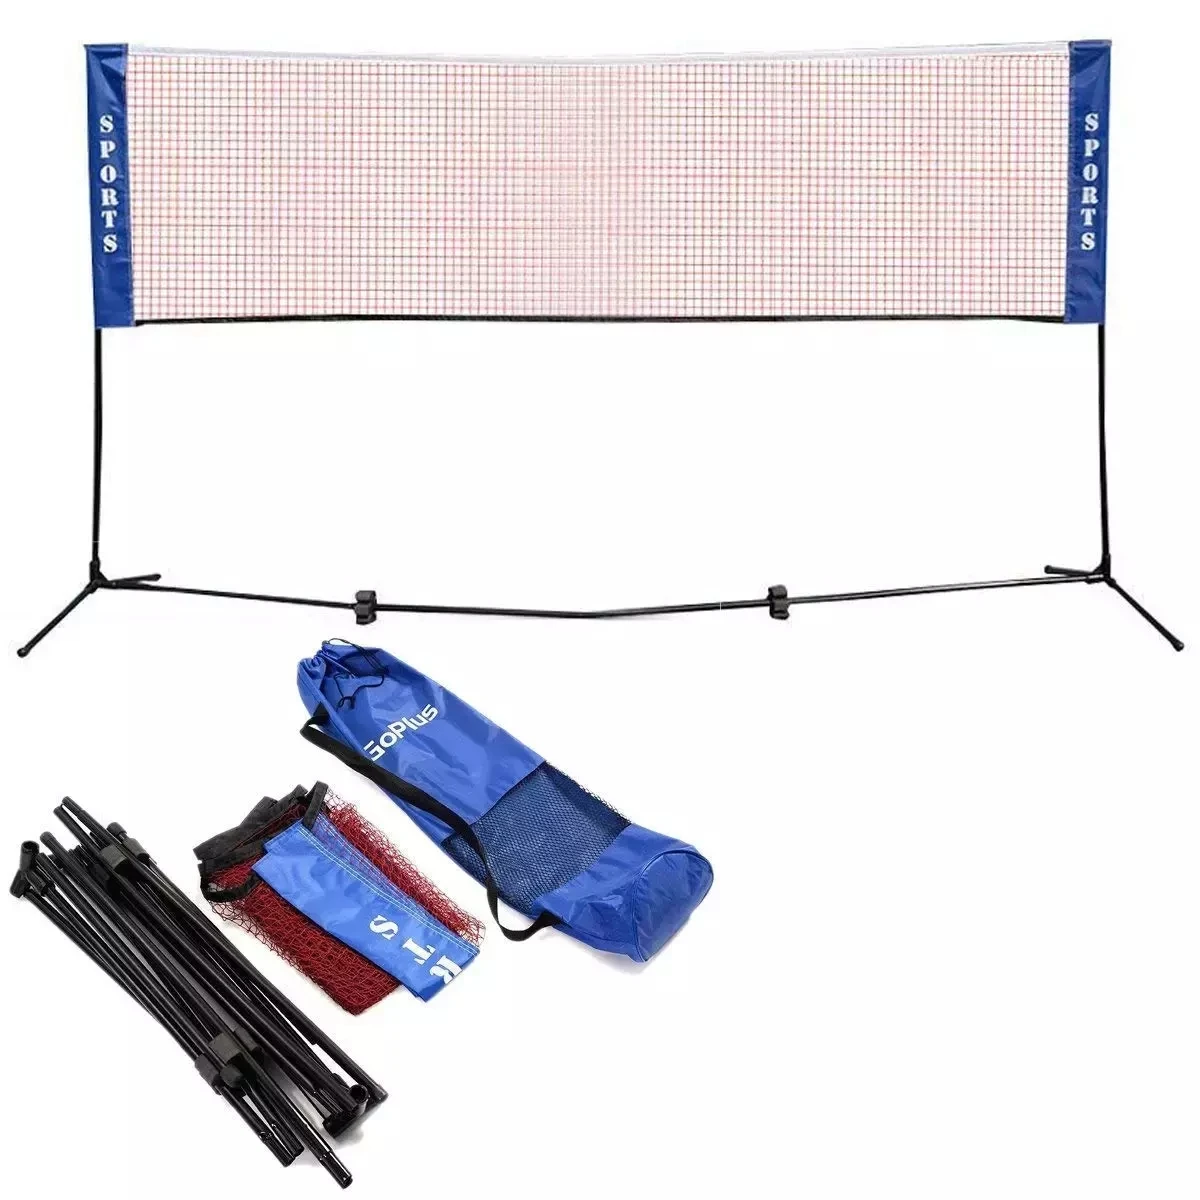 5.1m Portable Badminton Stand Volleyball Tennis Net Volleyball Net and Bag Set 